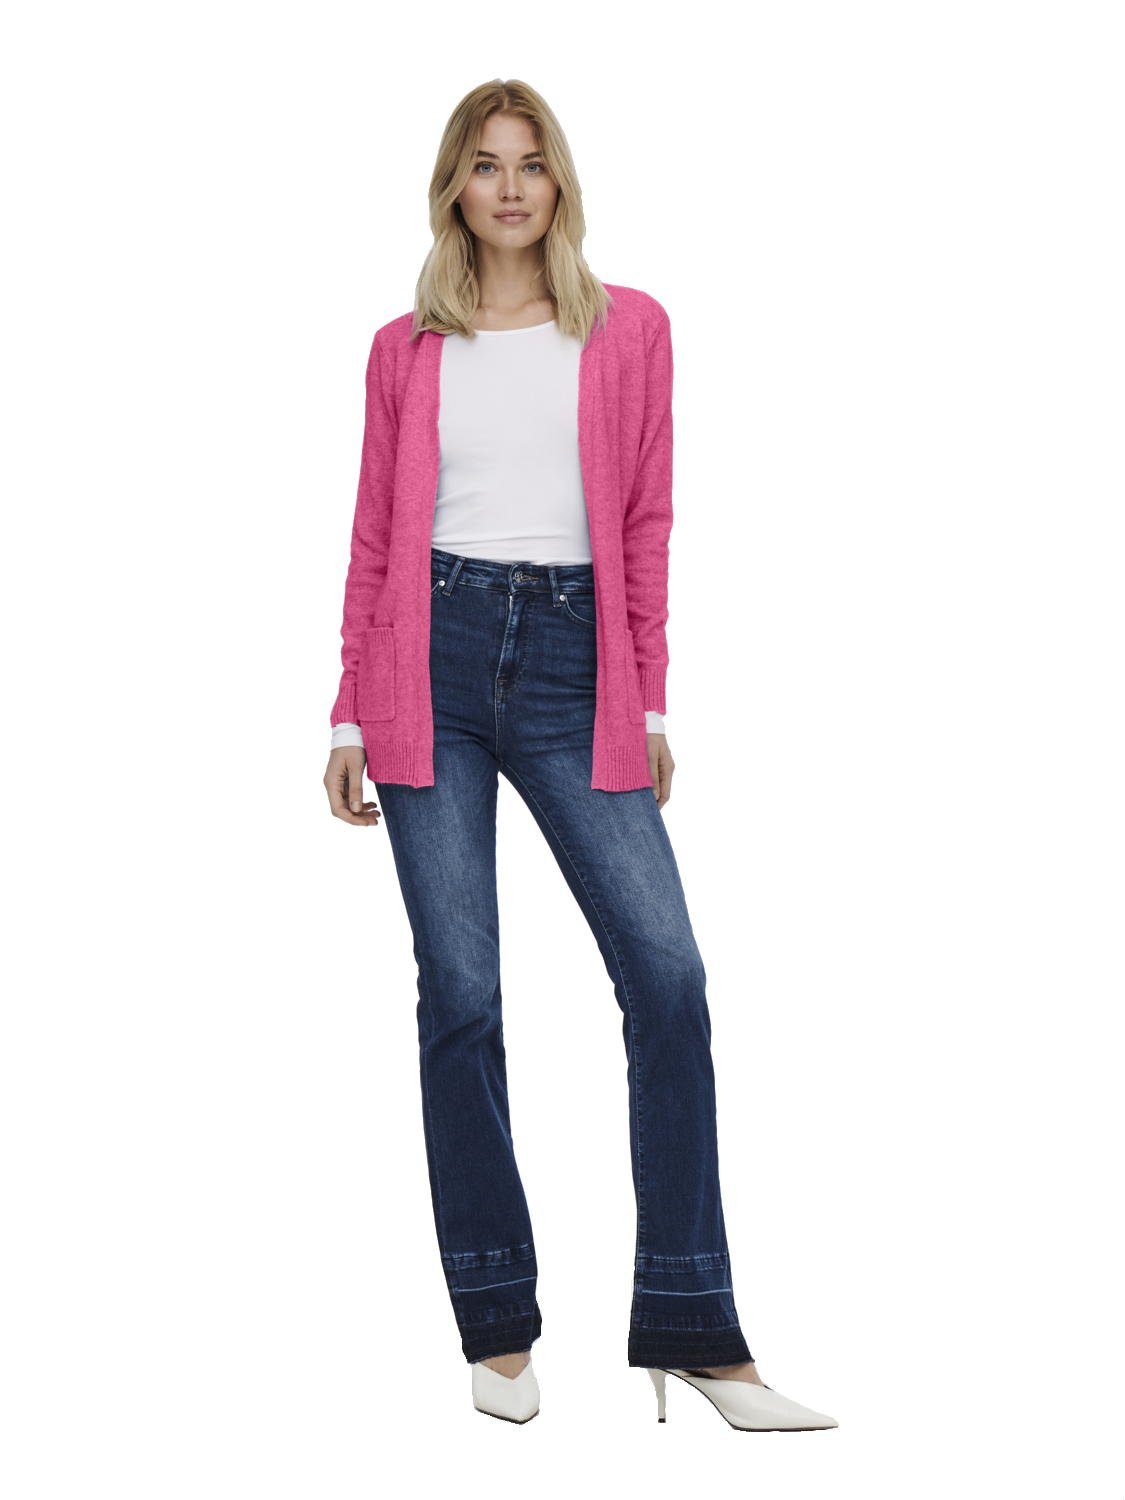 Strick-Jacke offen - Cardigan Knt Open ONLY Damen OnlLesly Cardigan Only female Pink